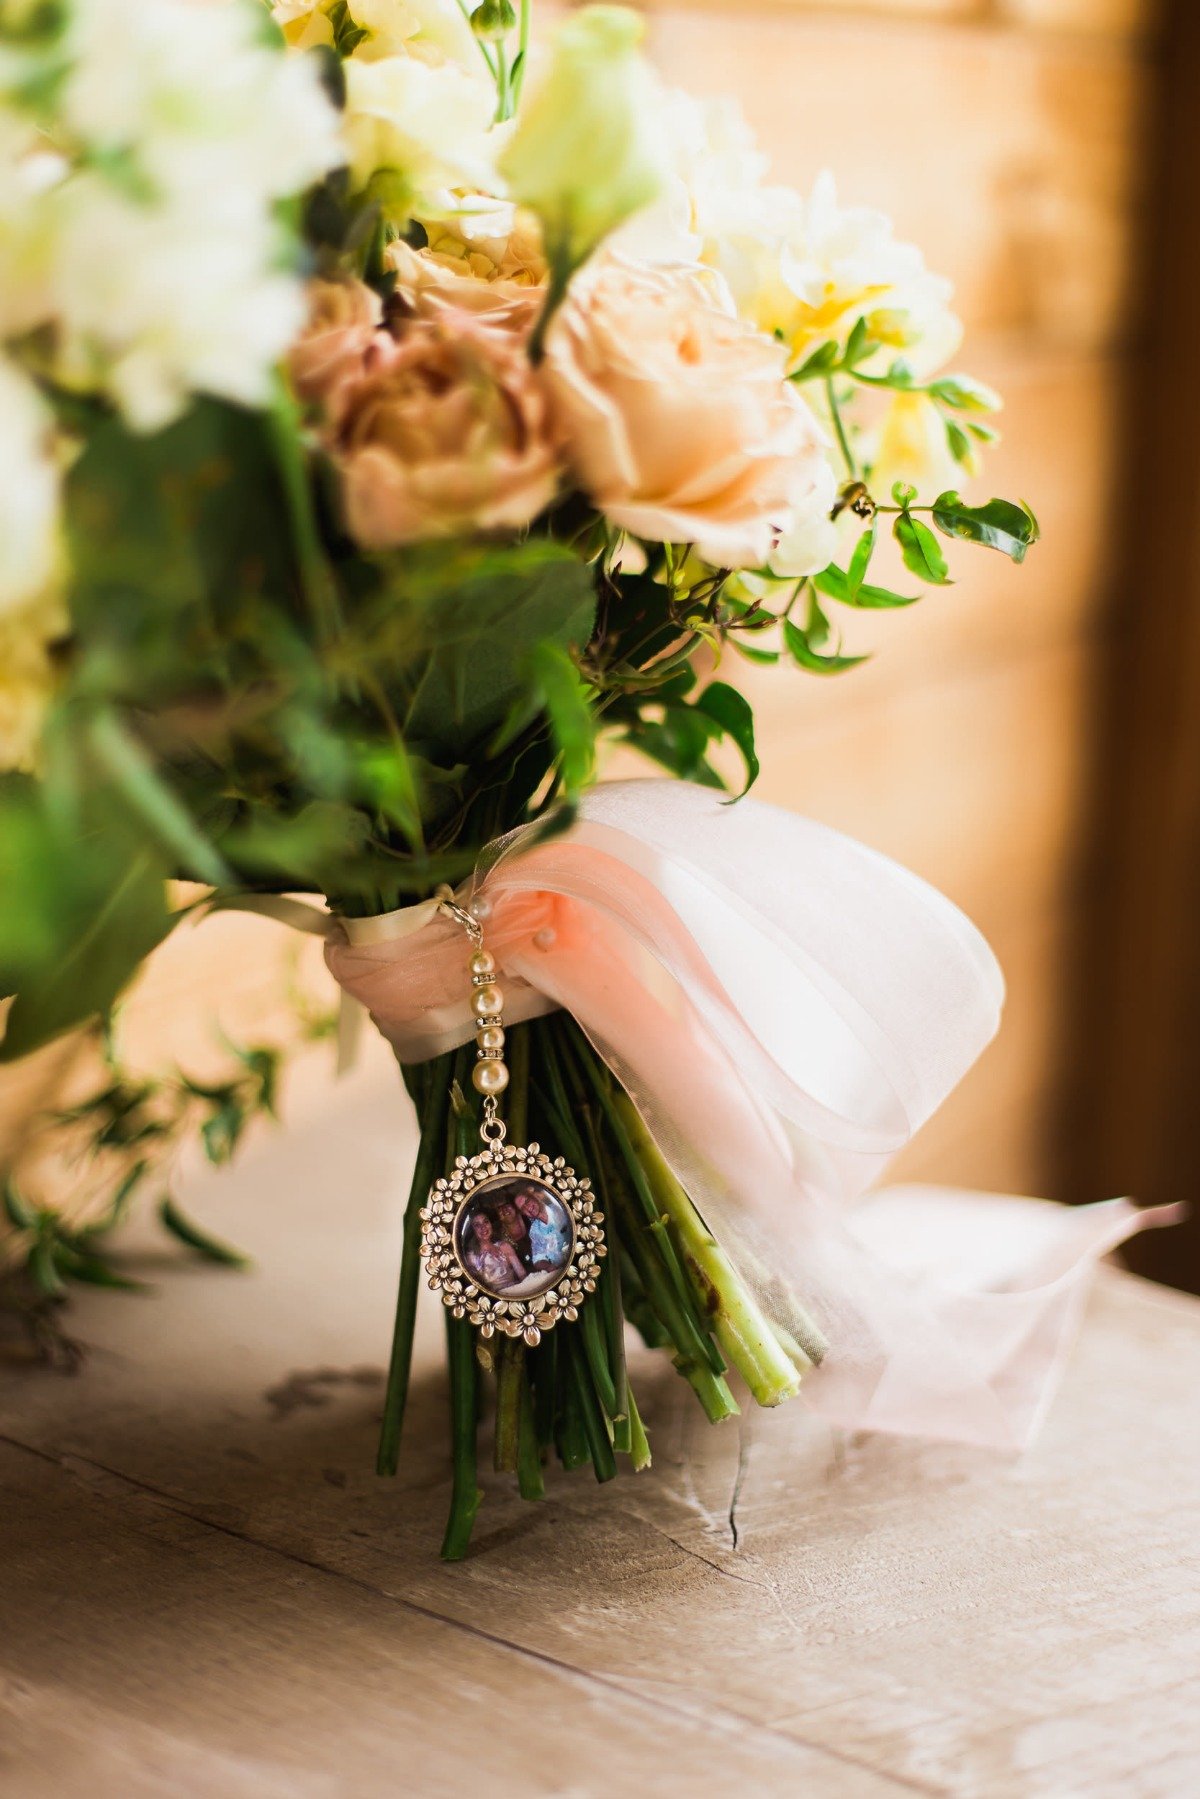 vintage charm placed on Italian style wedding bouquet